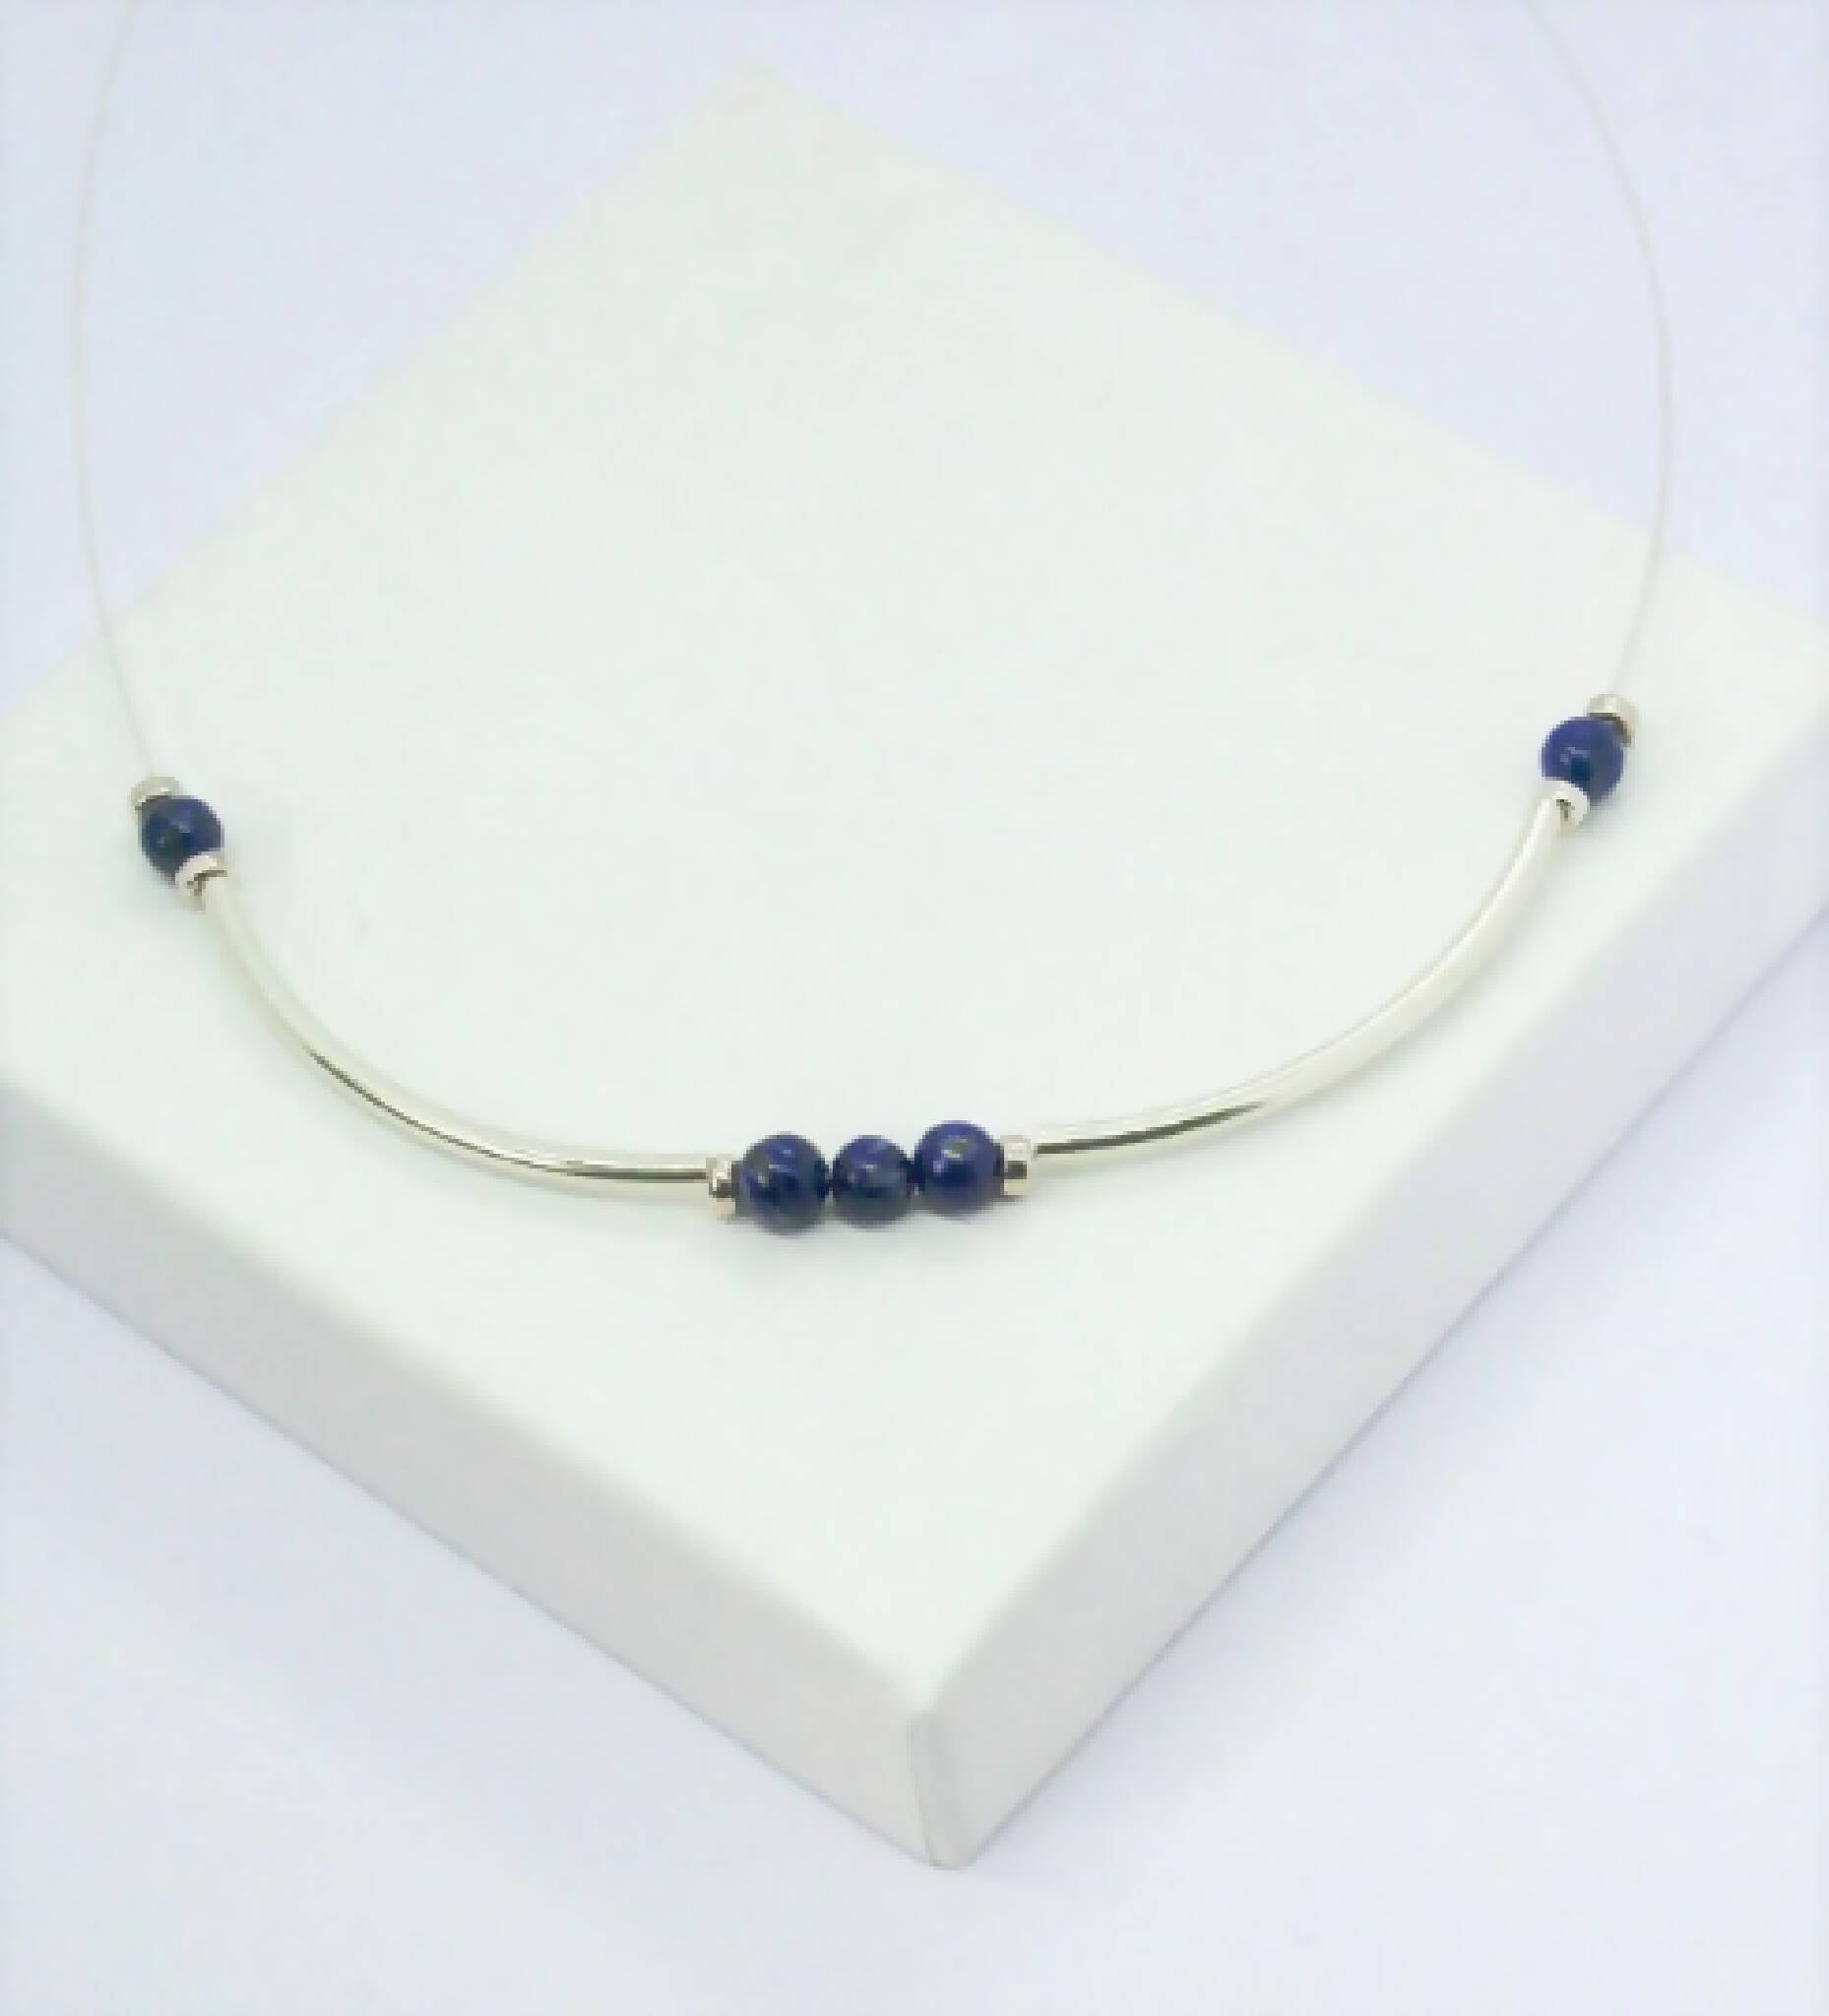 Lapis lazuli and sterling silver necklace